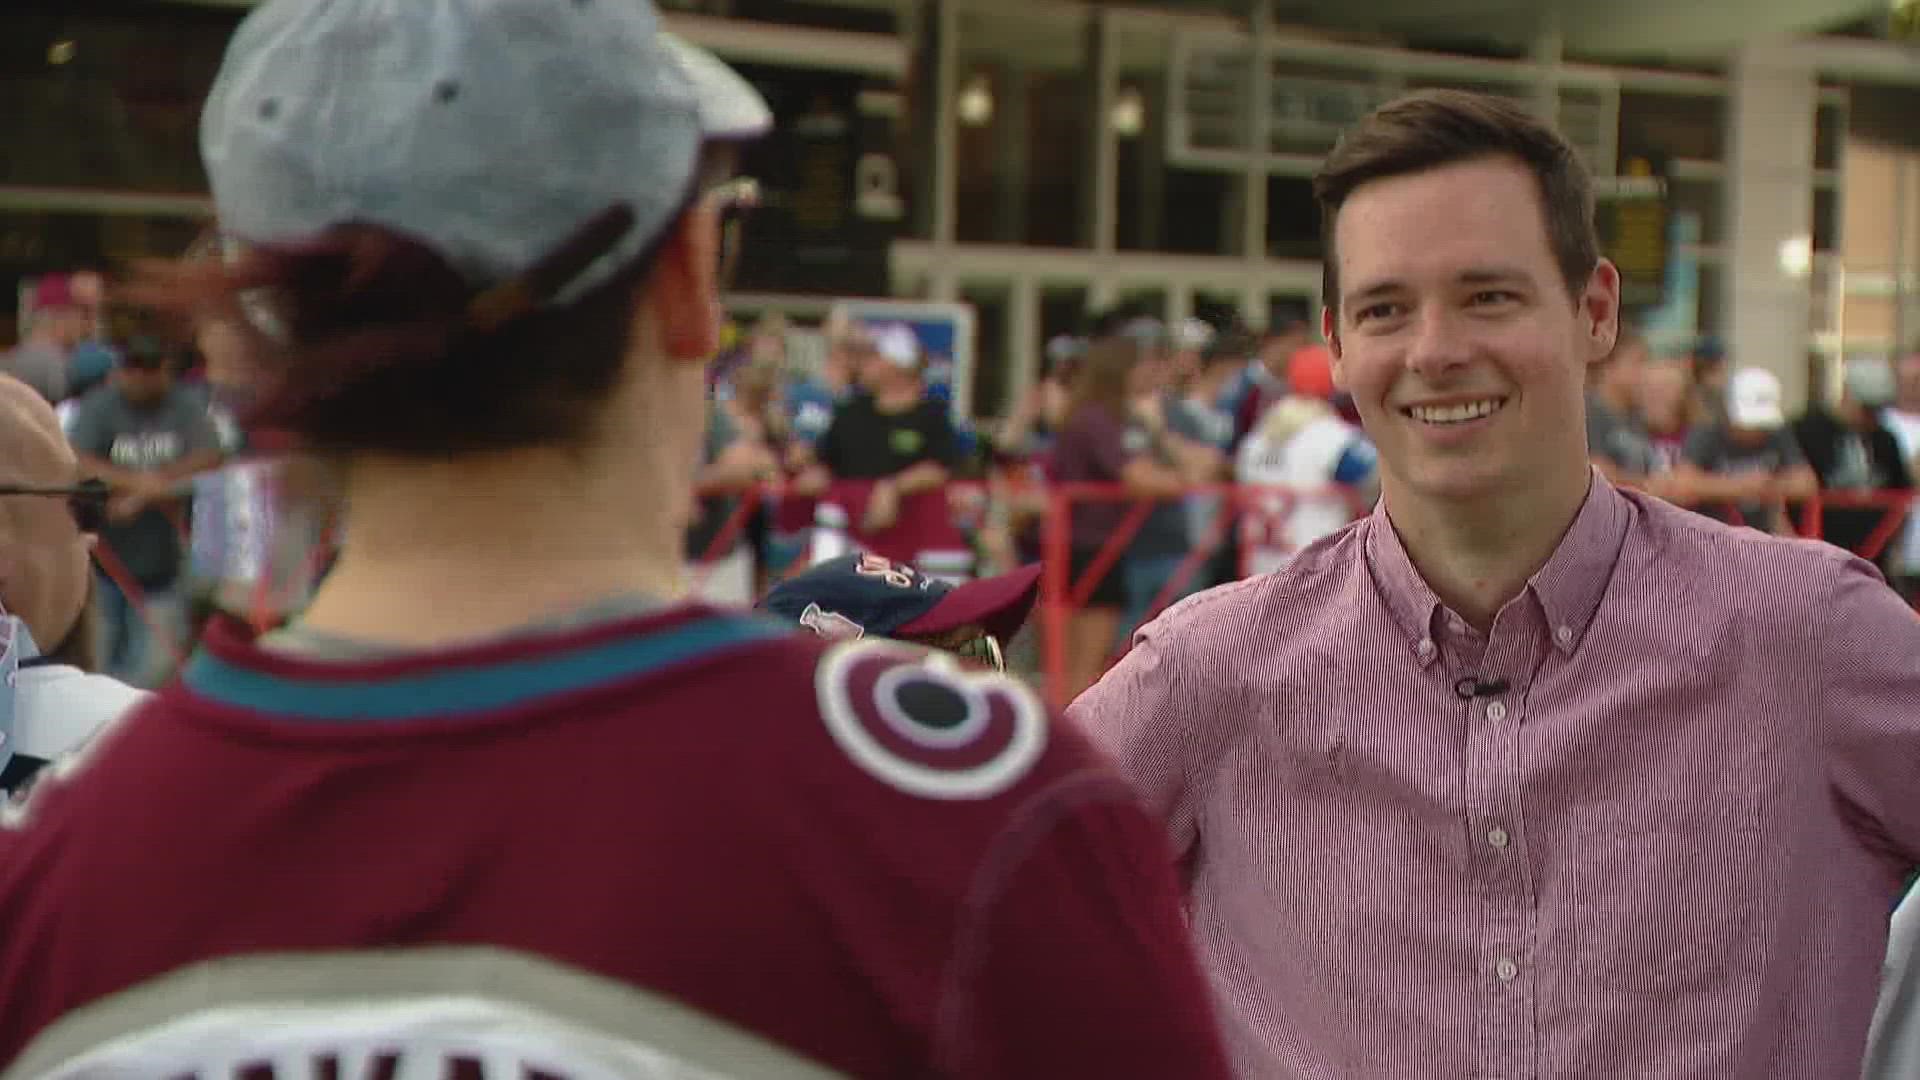 9NEWS reporter Noel Brennan spoke to fans who ditched work to celebrate with the city. Don't worry, no one's getting in trouble. Avs fans can stay anonymous.